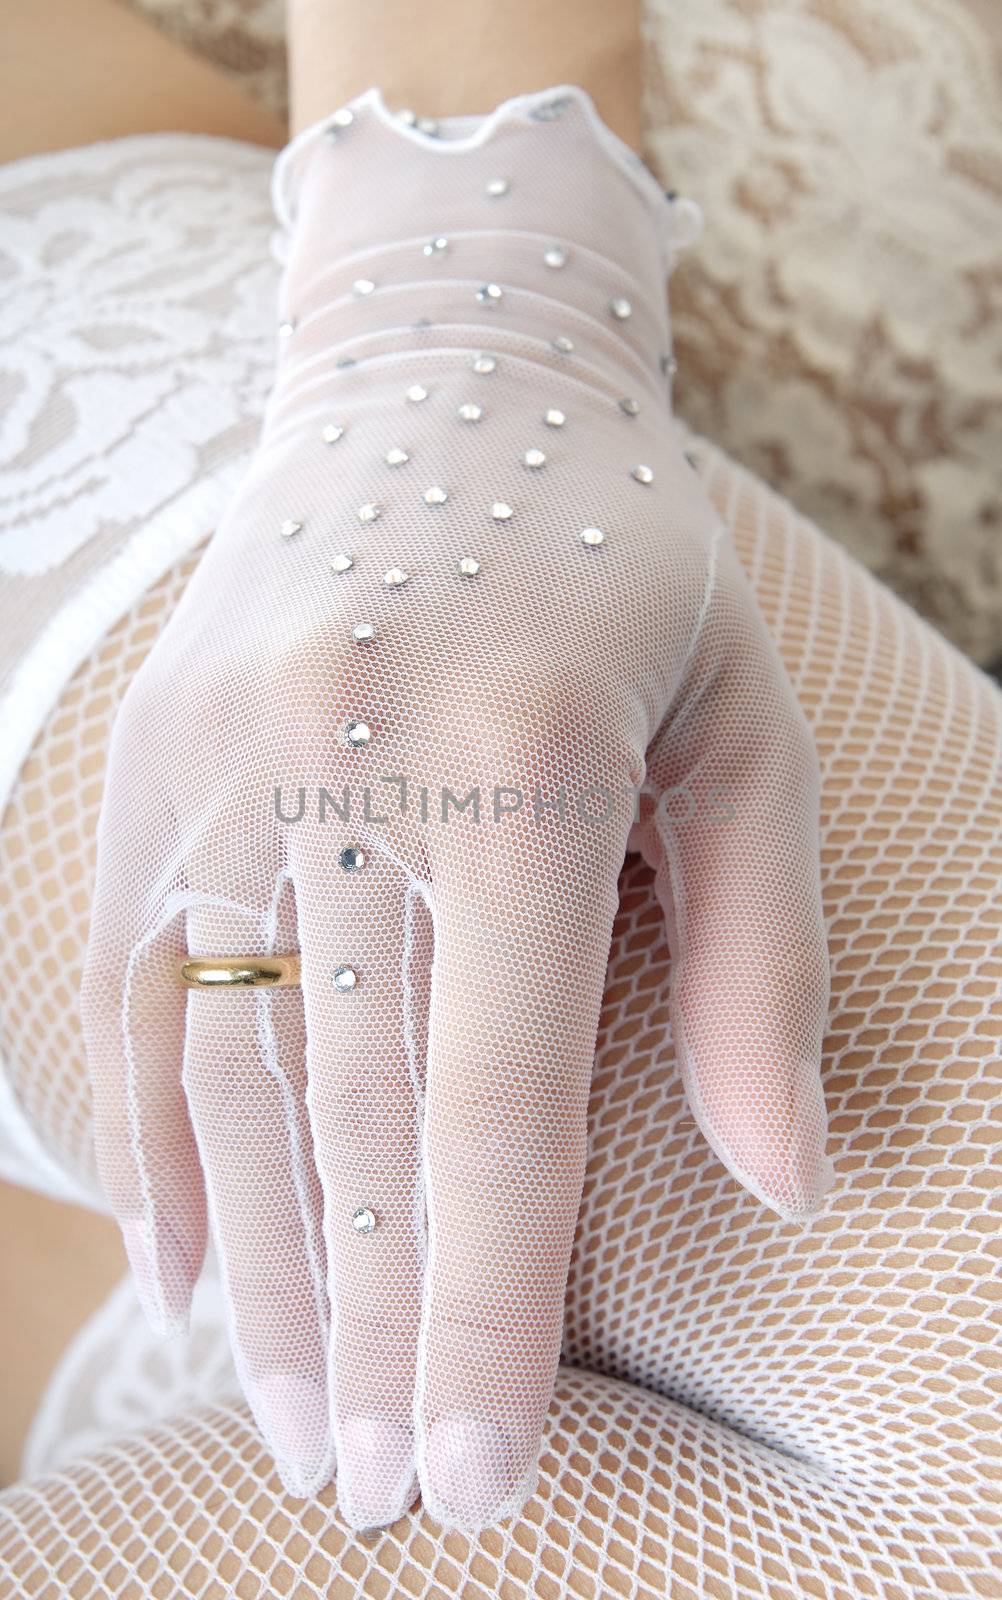 Close-up photo of the elegant hand in glove with wedding ring